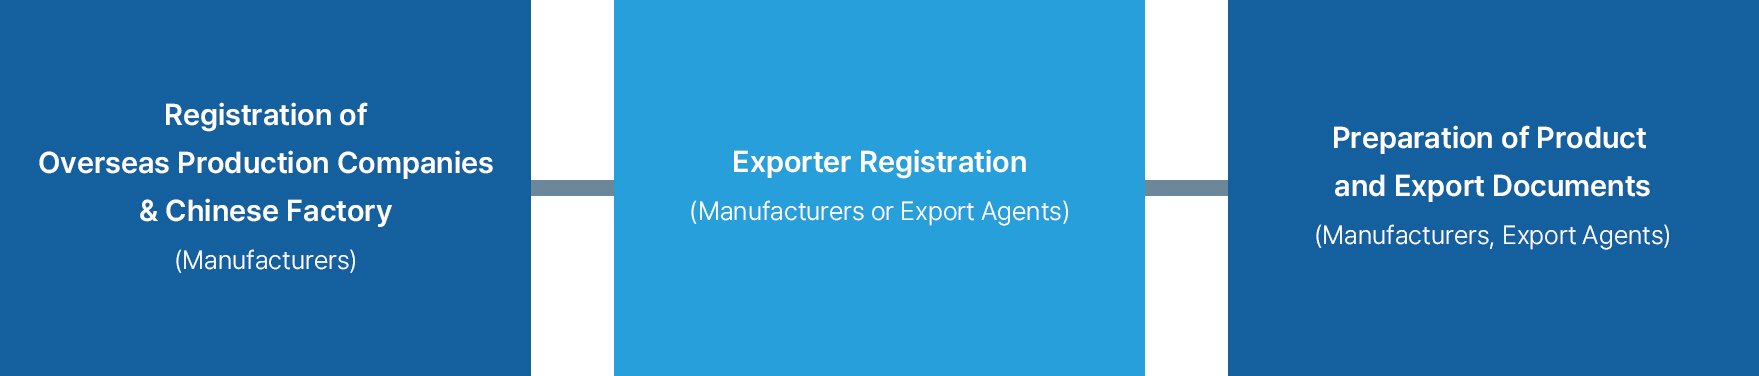 Registration of Overseas Production Companies